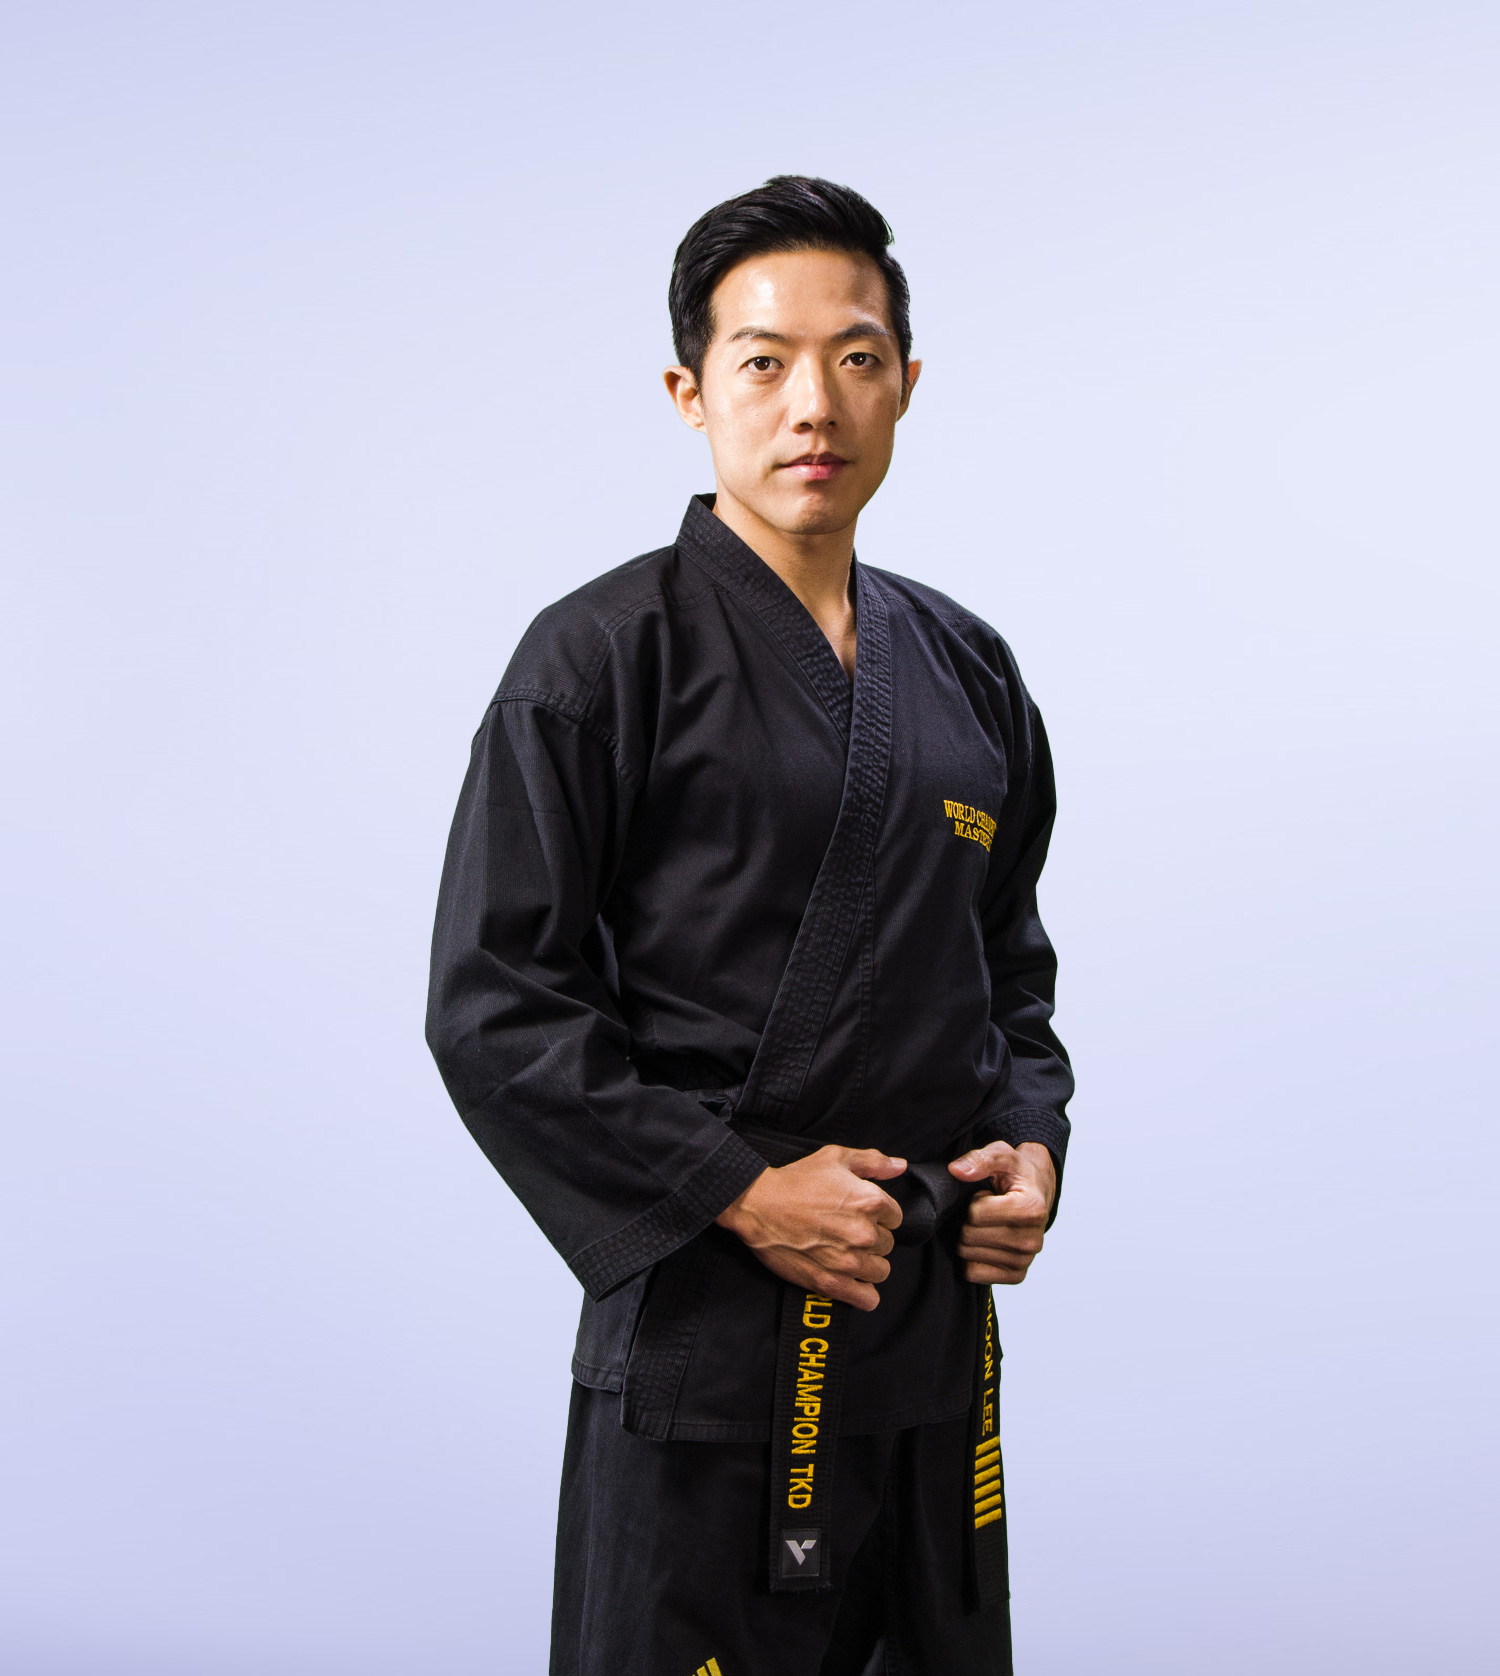 About Master Lee | Master Lee's World Champion Tae Kwon Do